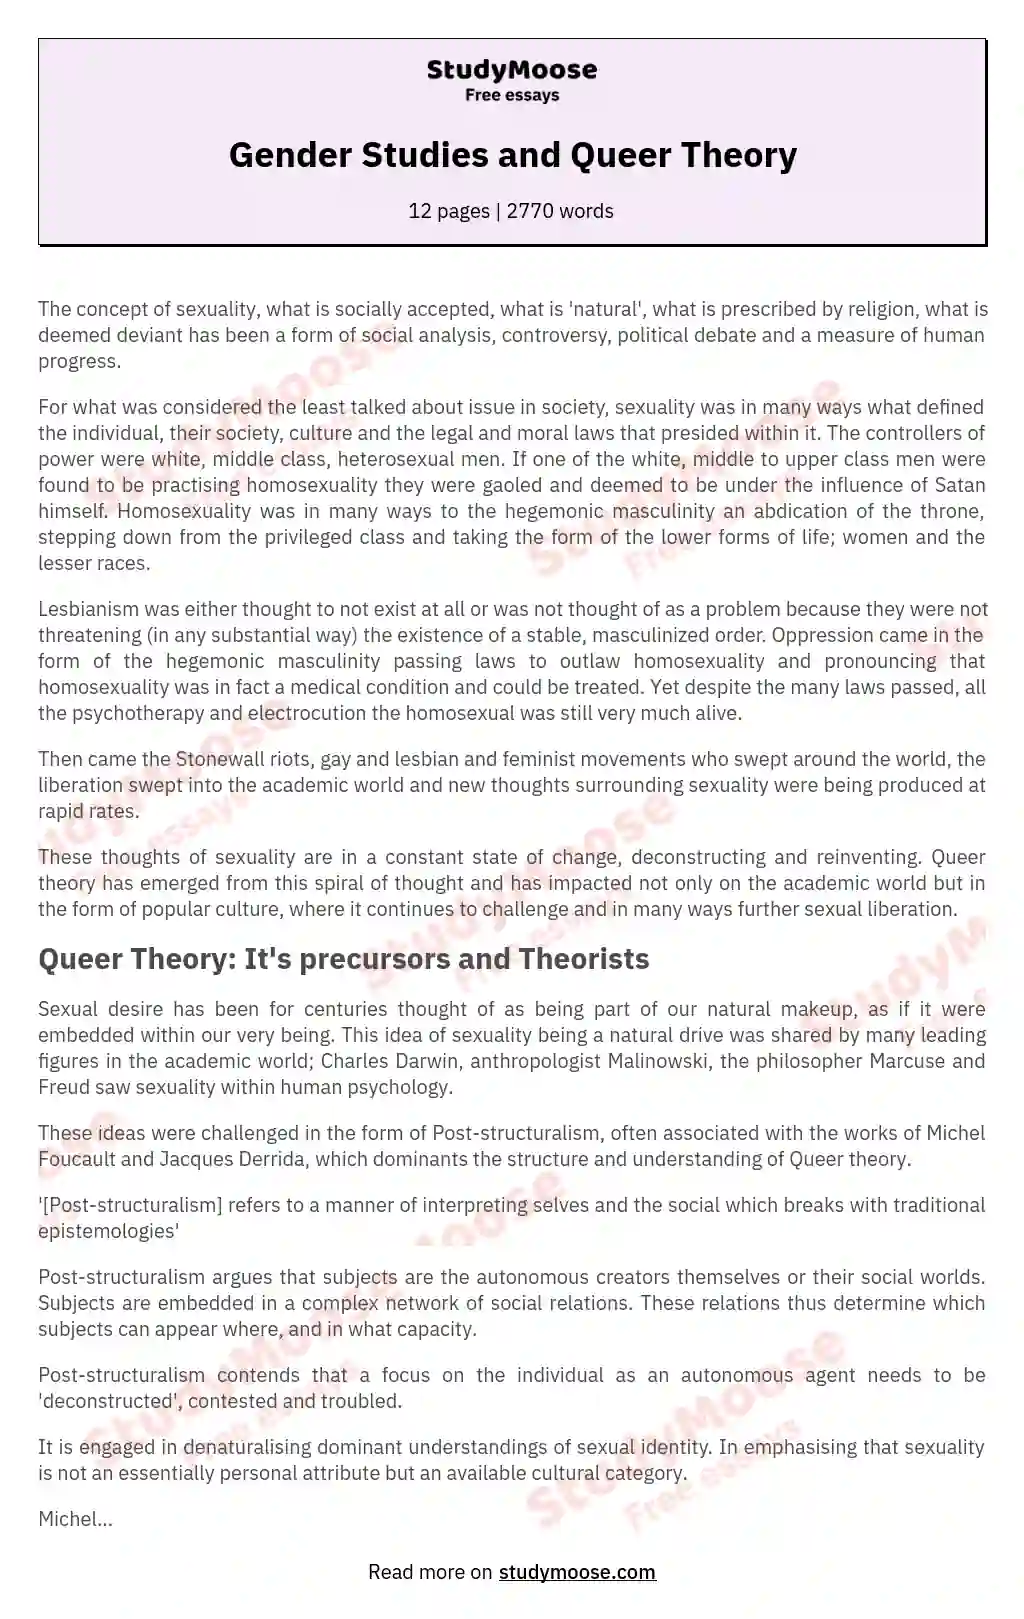 Gender Studies and Queer Theory essay